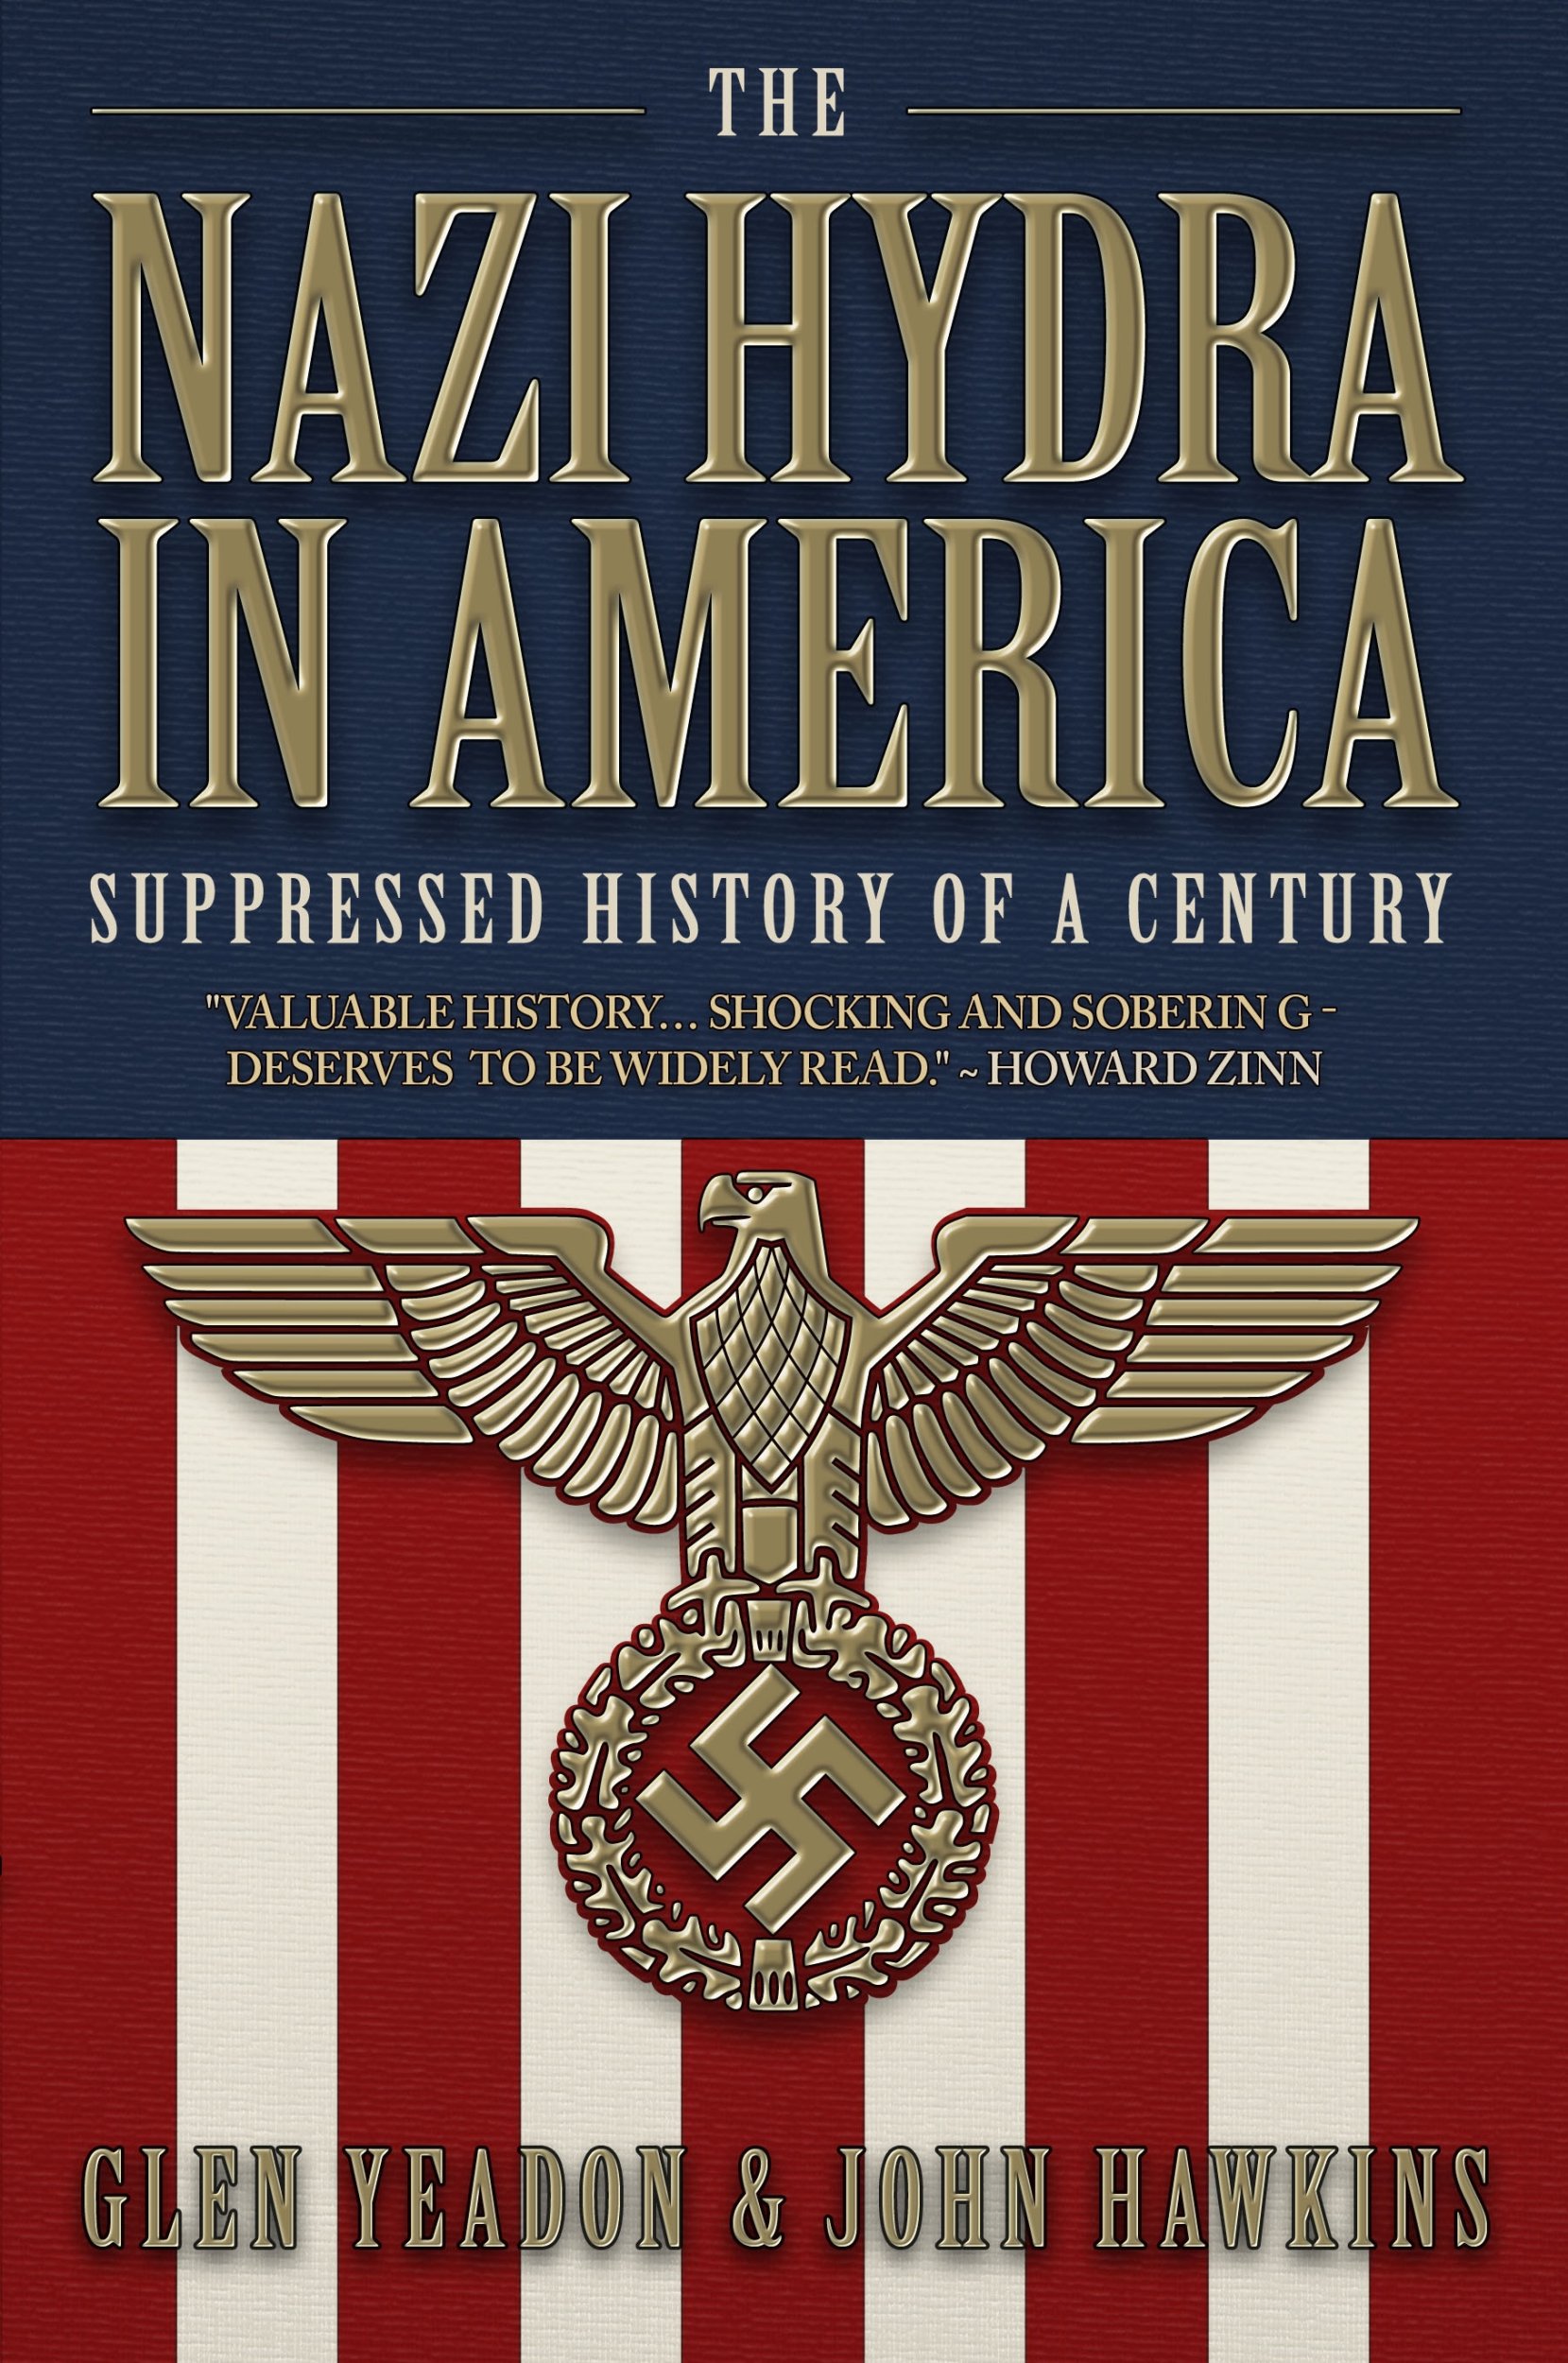 Image of The Nazi Hydra In America - The 1930s Part 5: Congressmen & Seditionist